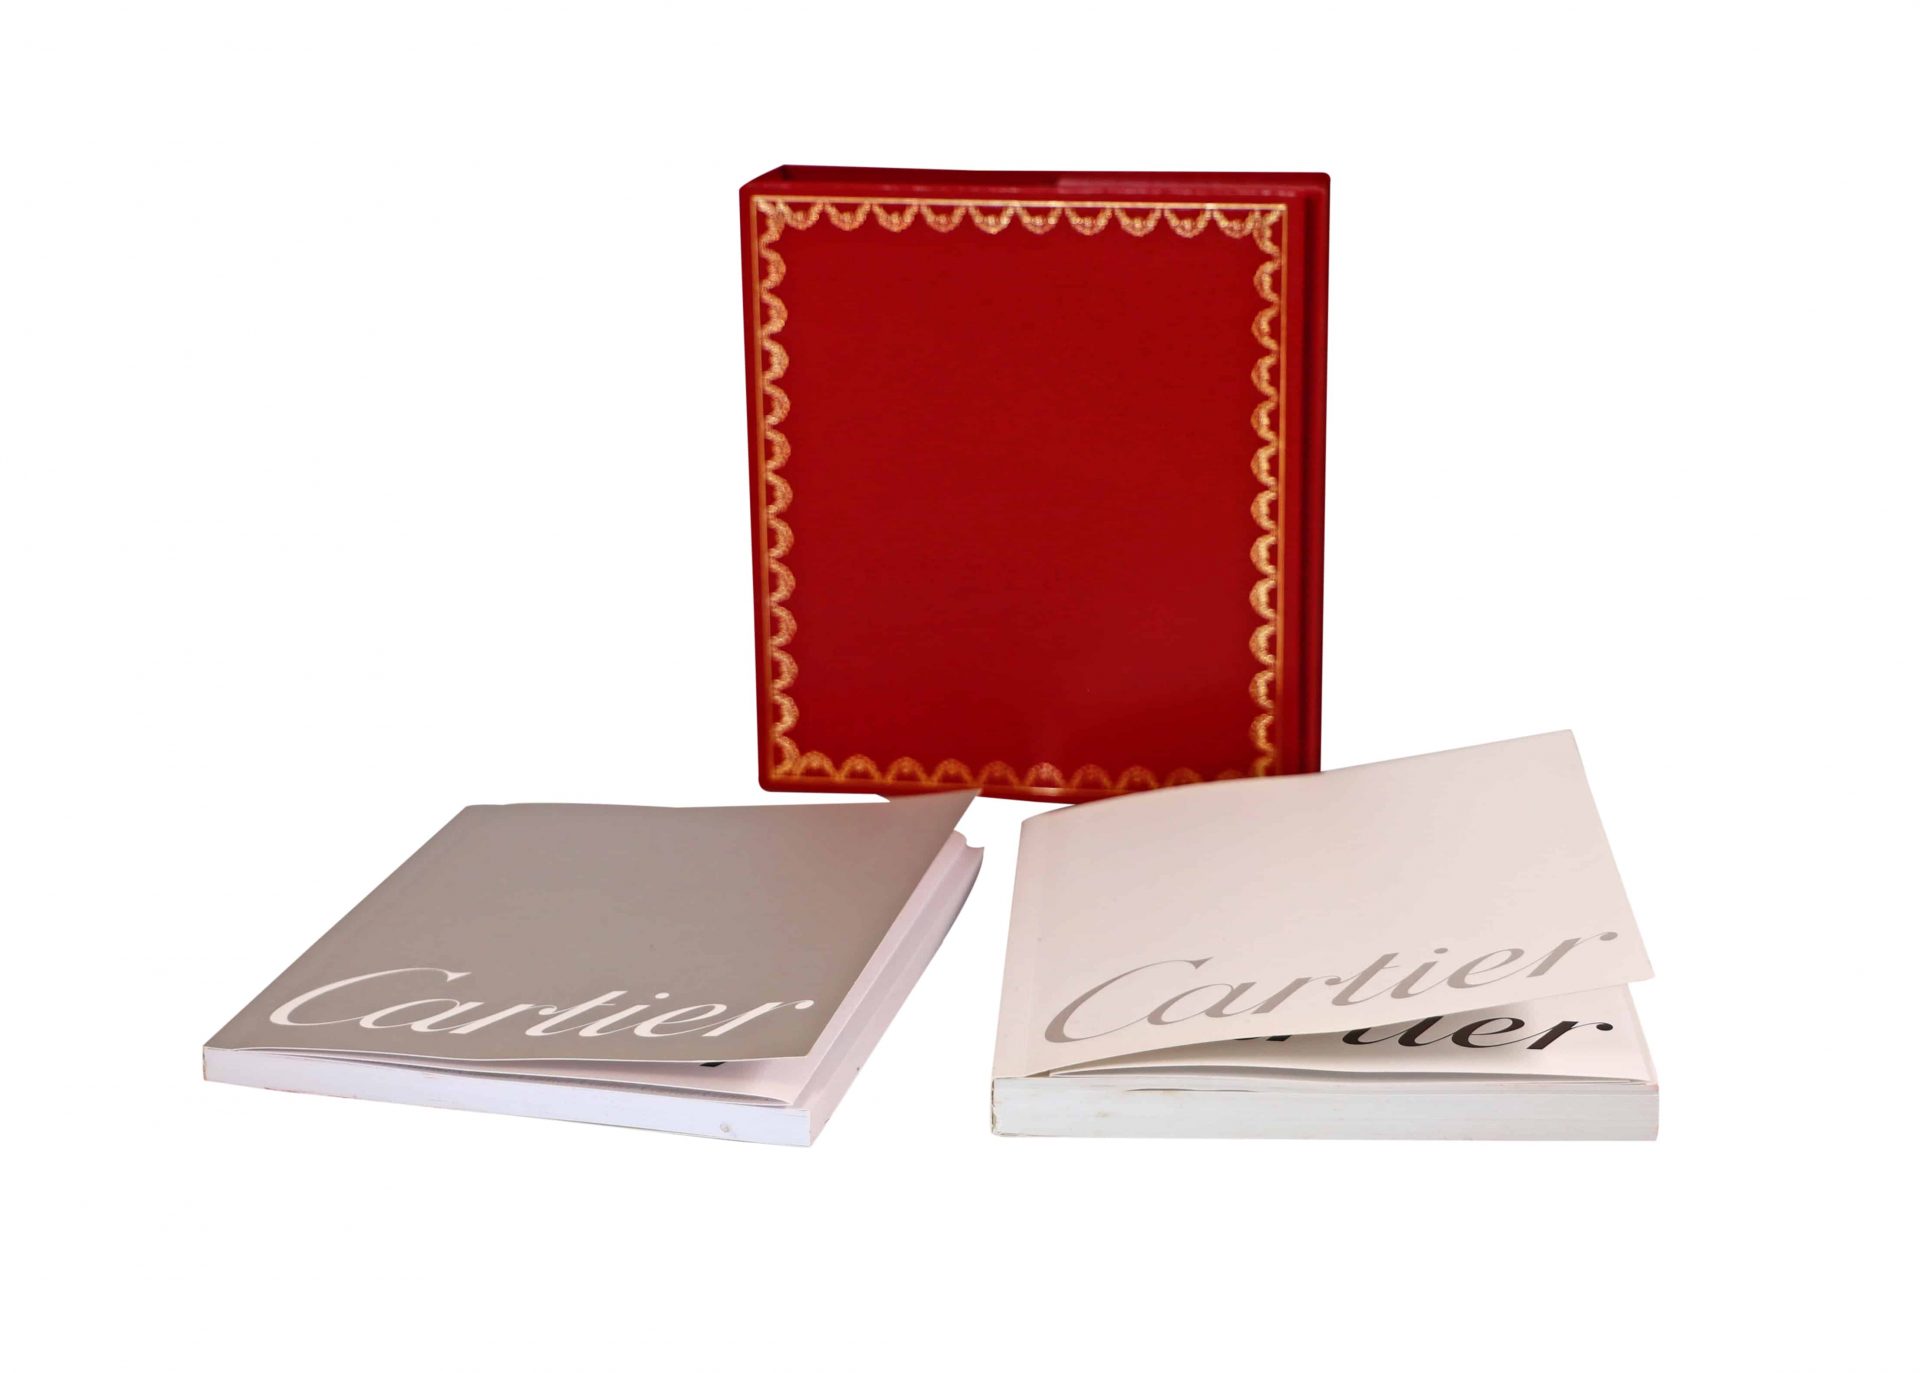 6824 Cartier Watch Warranty Instruction Manual Booklets with Leather Sleeve - Rare Watch Parts